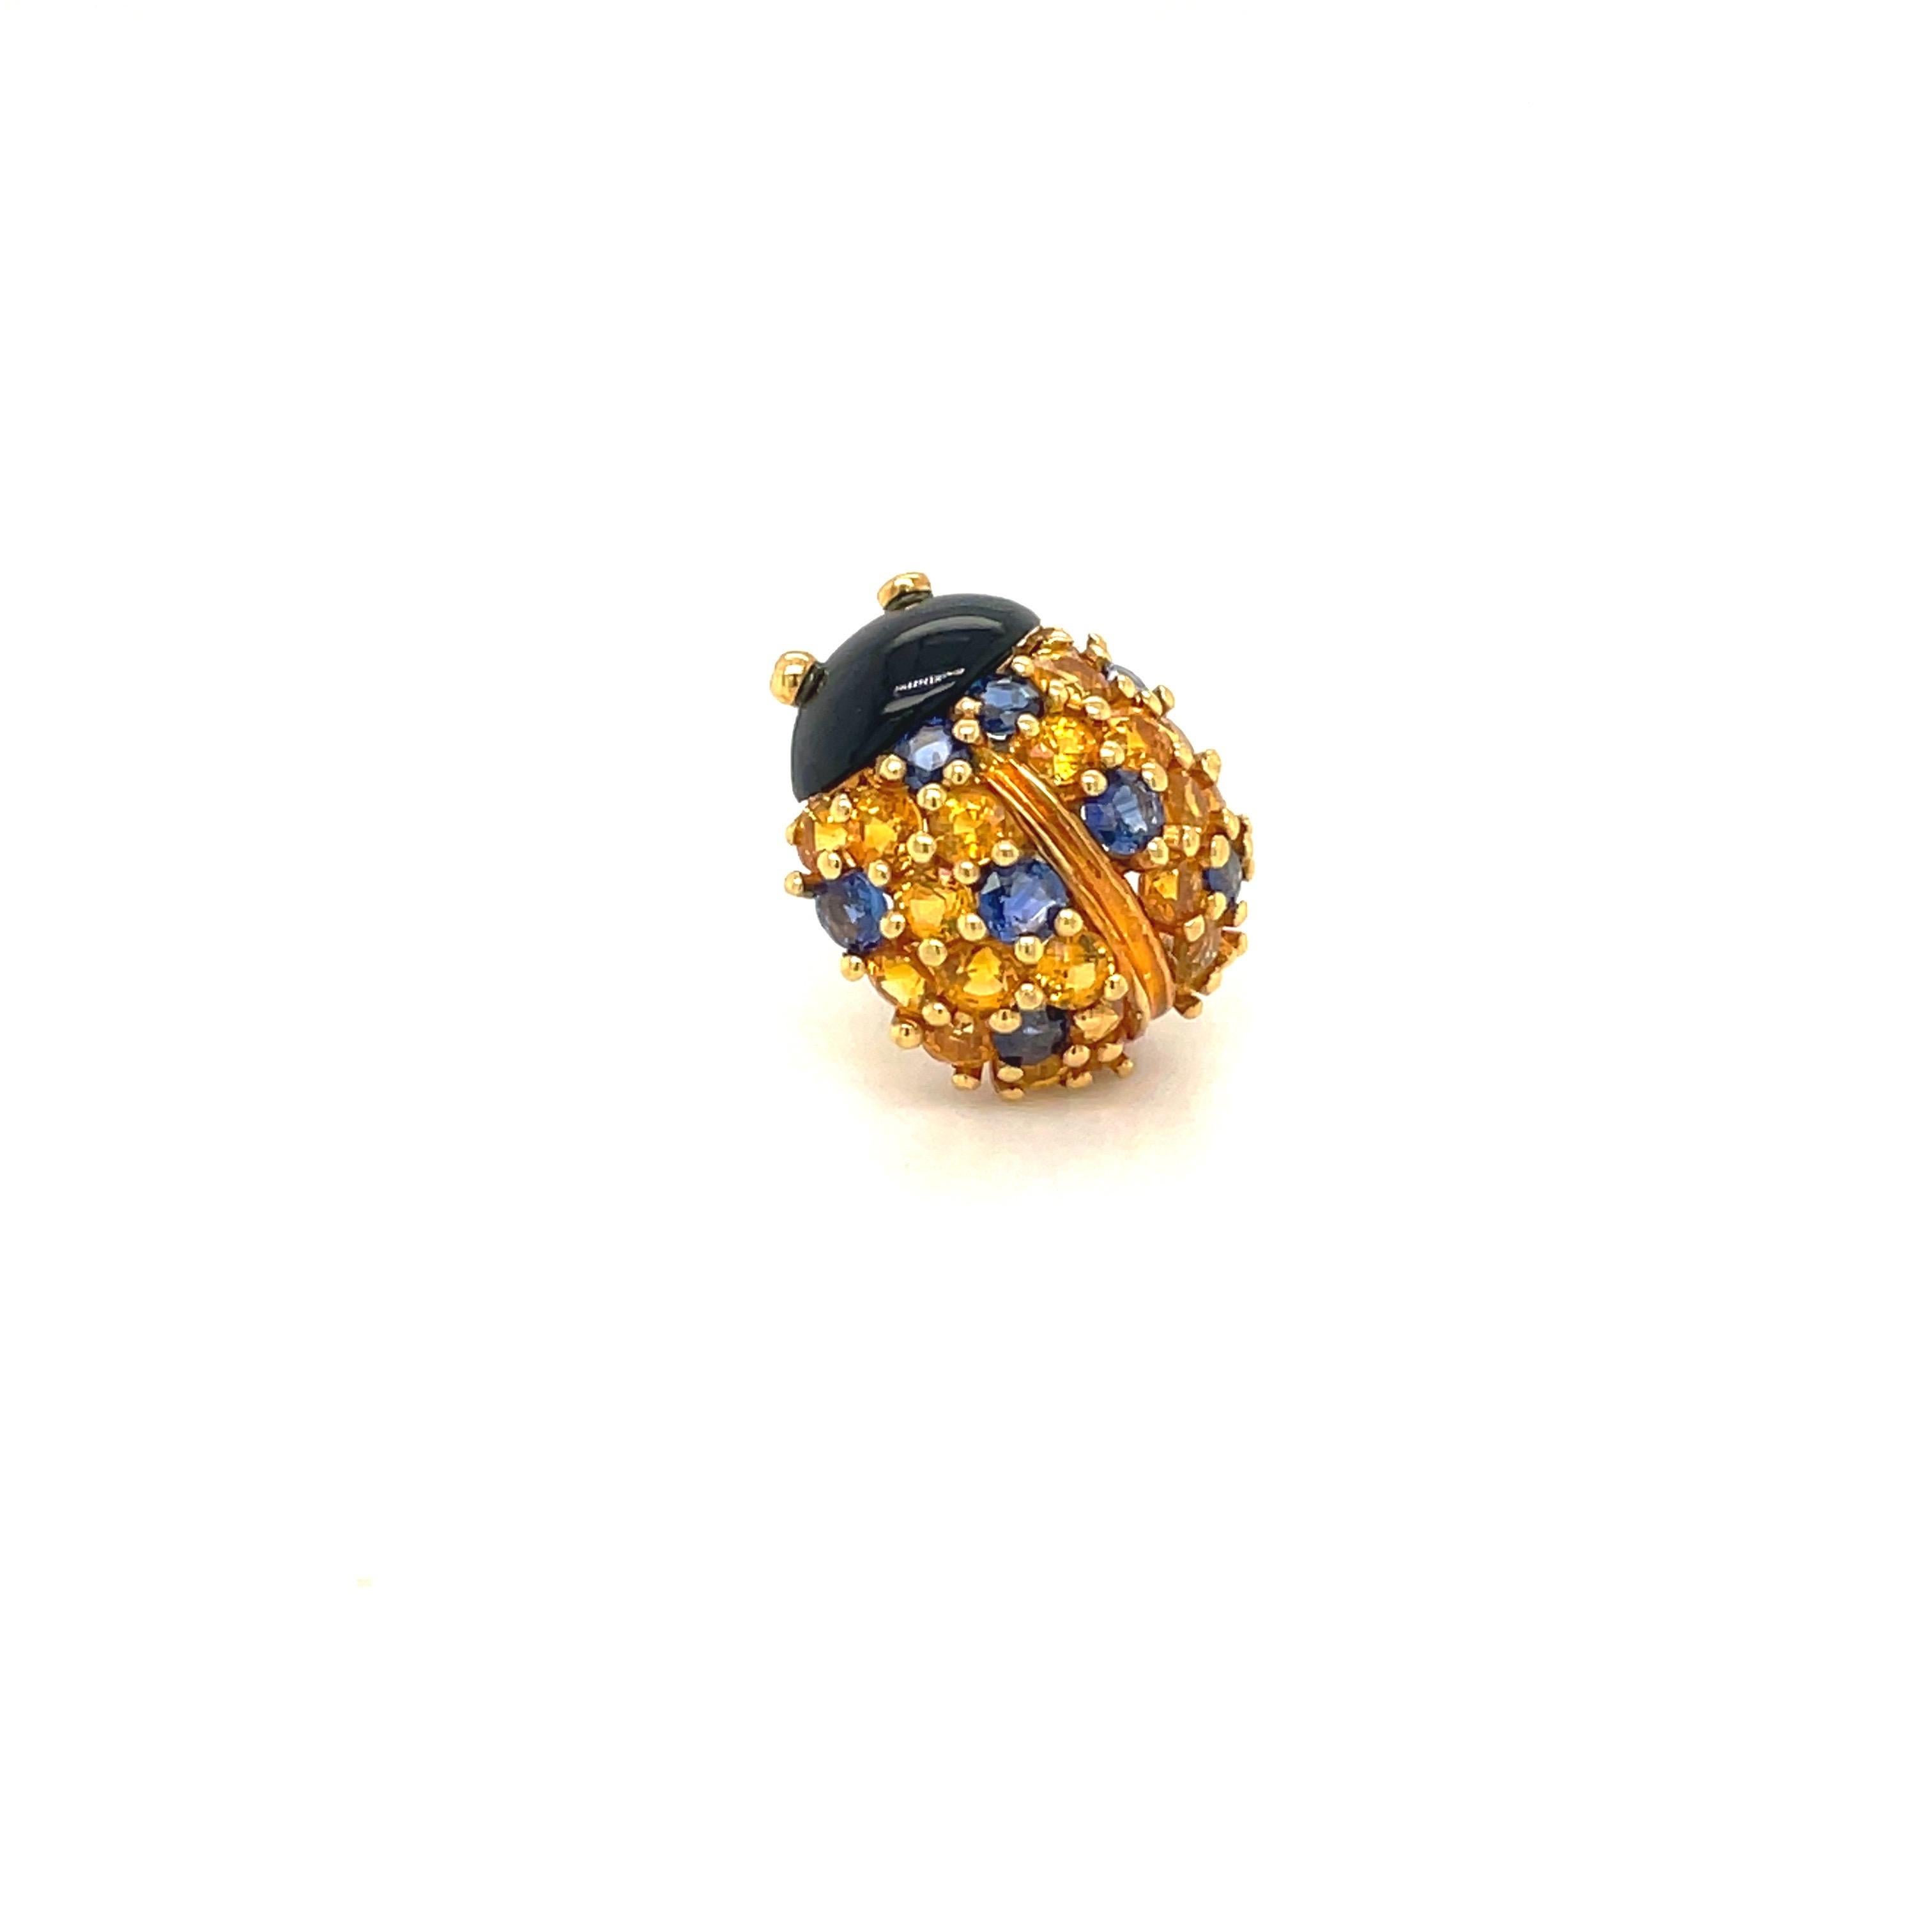 Contemporary Jean Vitau 18 Karat Yellow Gold Ladybug Brooch with Blue and Yellow Sapphires For Sale